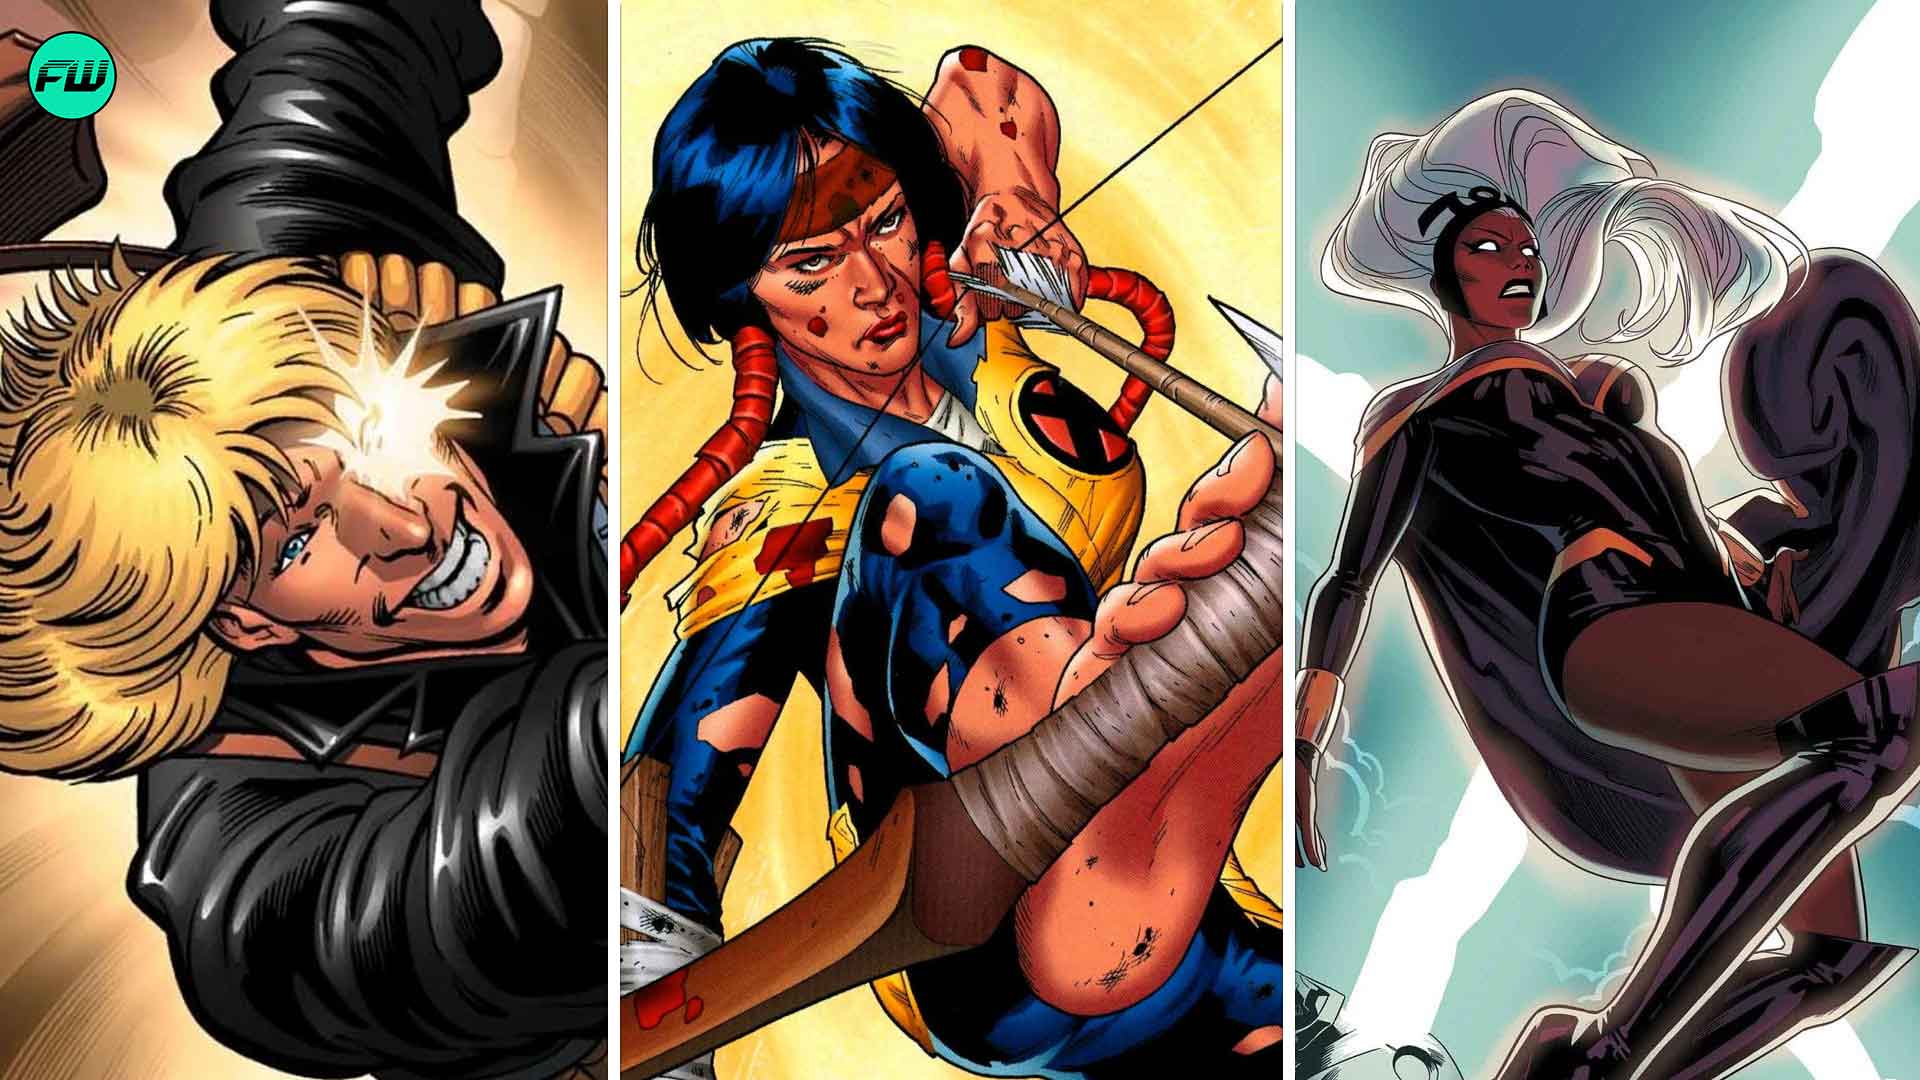 Marvel Superheroes That Could Theoretically Exist